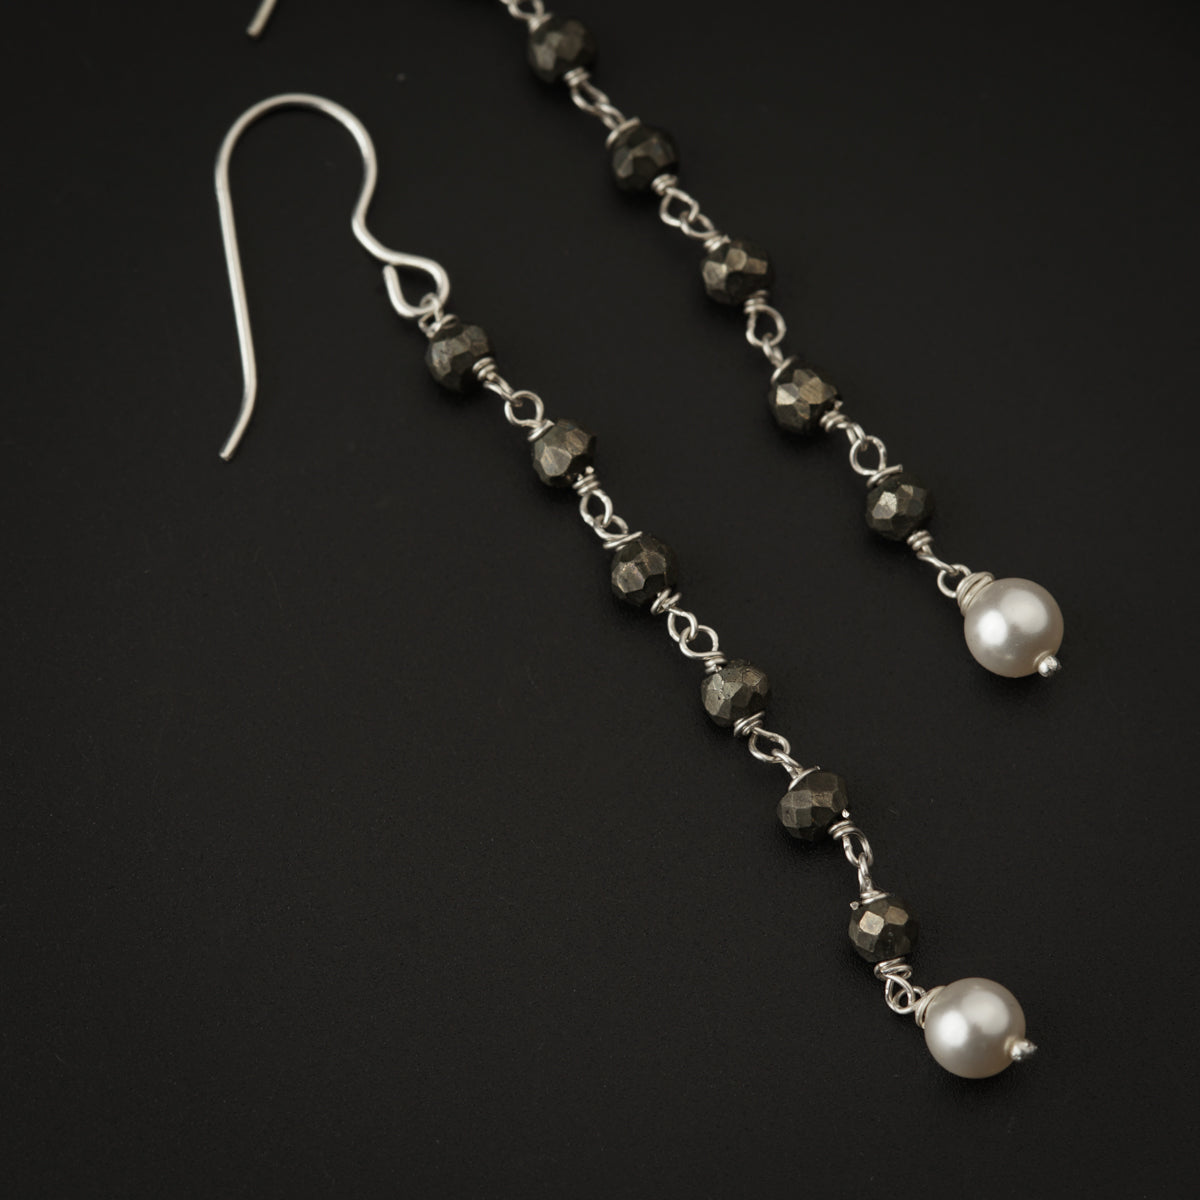 Pyrite Dangler with Pearls